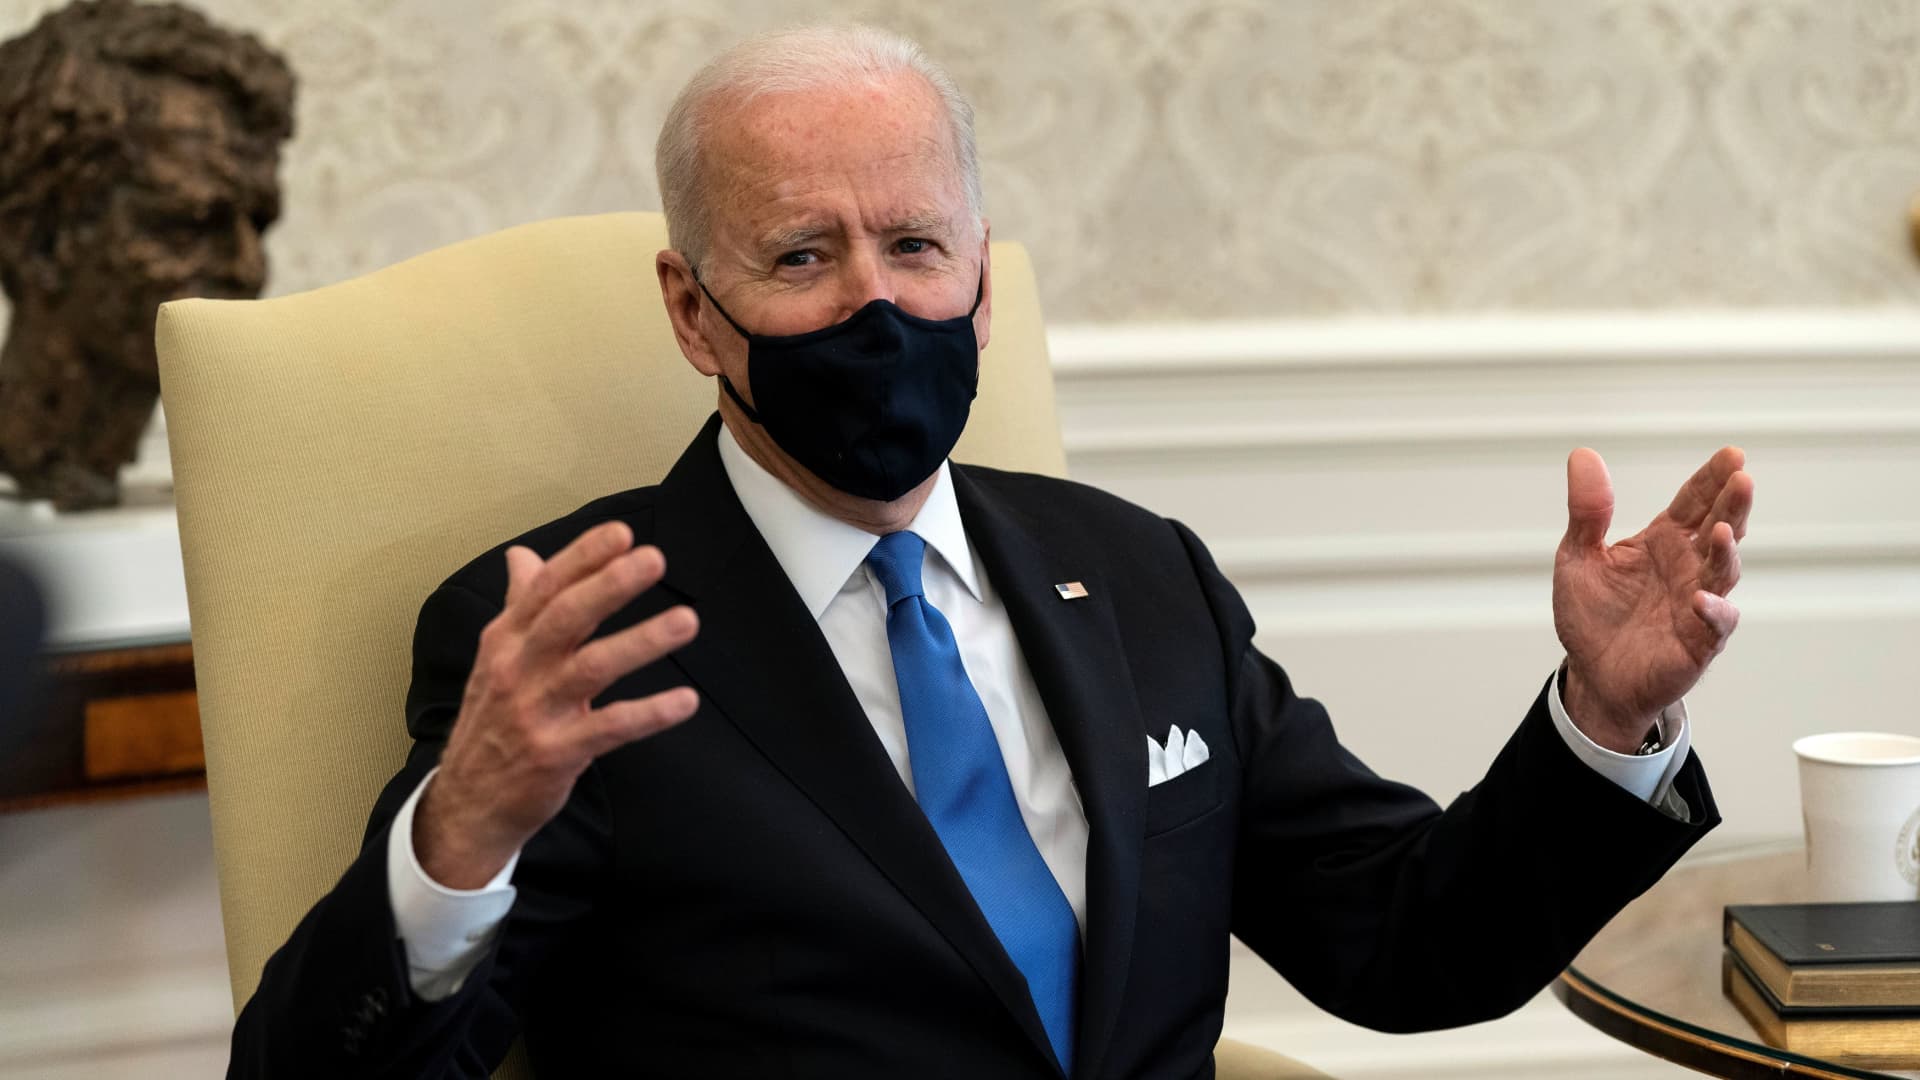 U.S. President Joe Biden speaks during a bipartisan meeting on cancer legislation in the Oval Office at the White House in Washington, March 3, 2021.